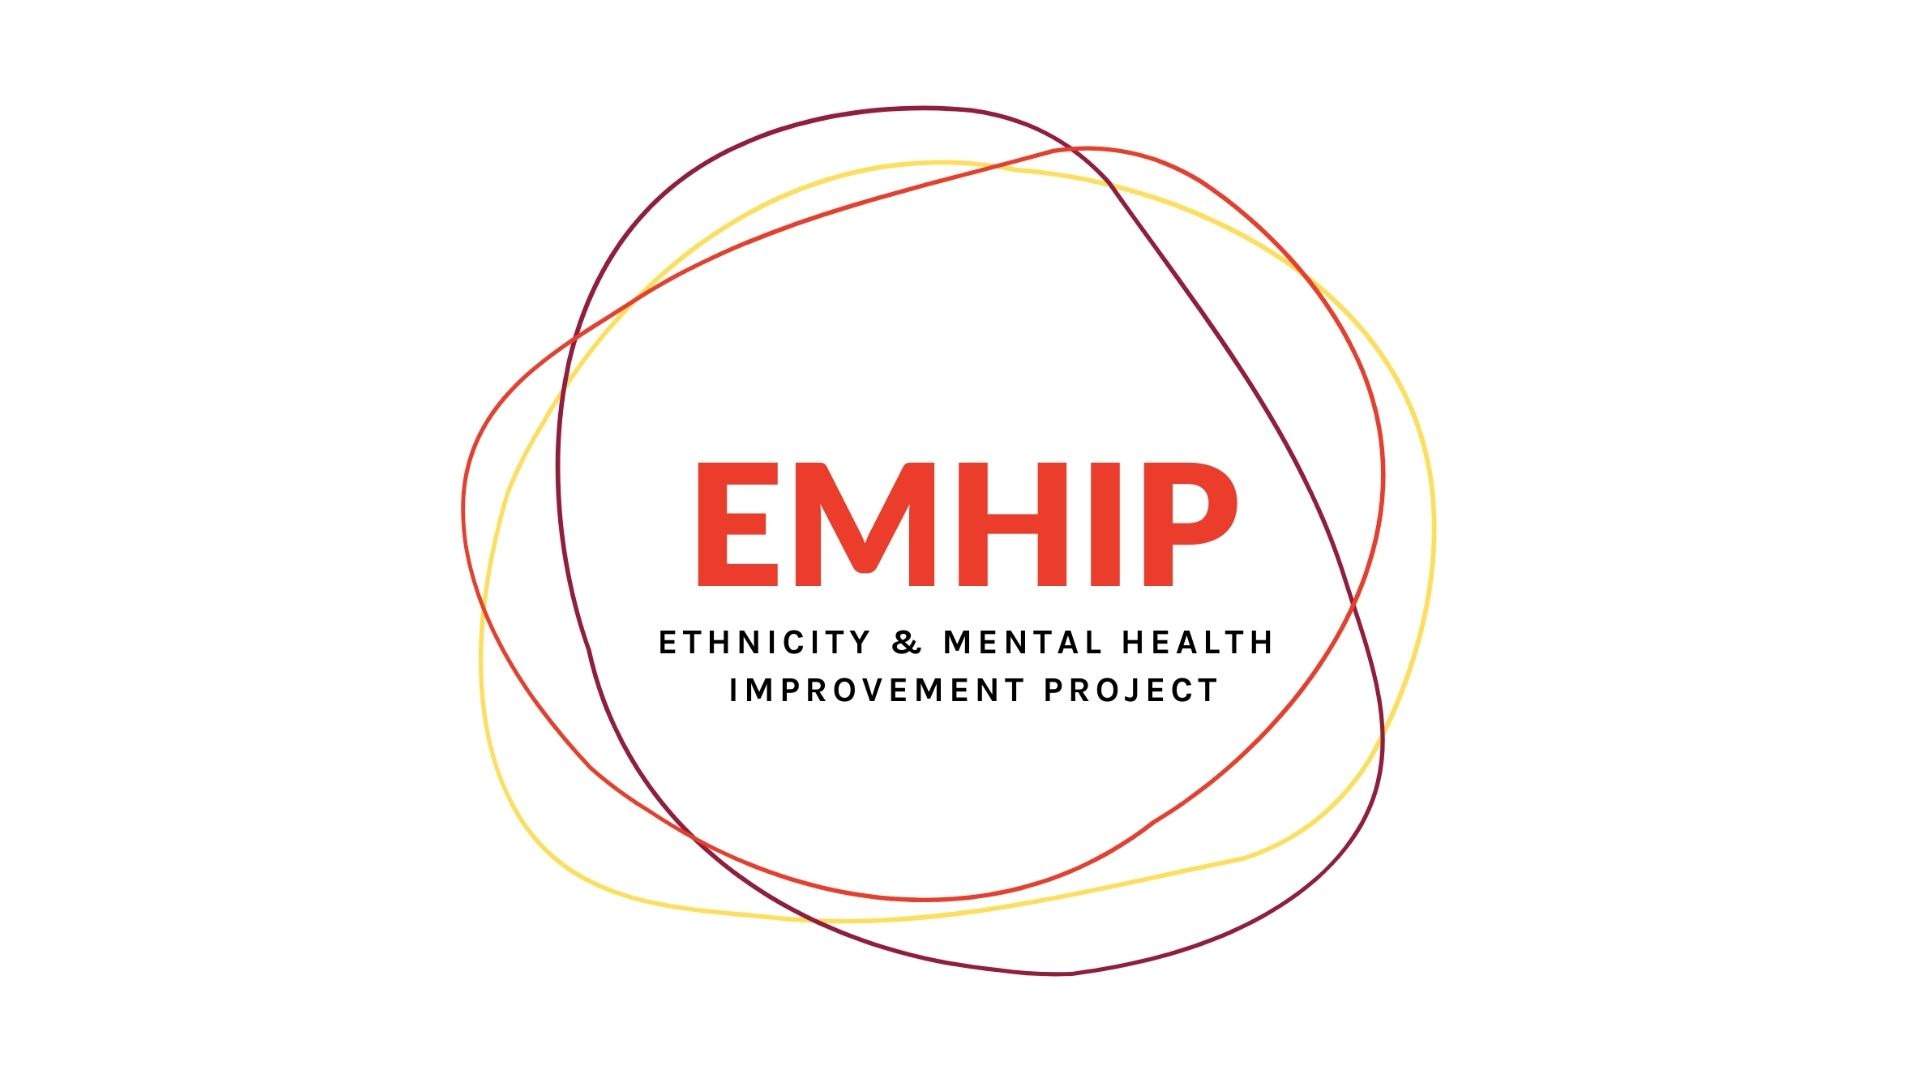 Ethnicity and Mental Health Improvement Project